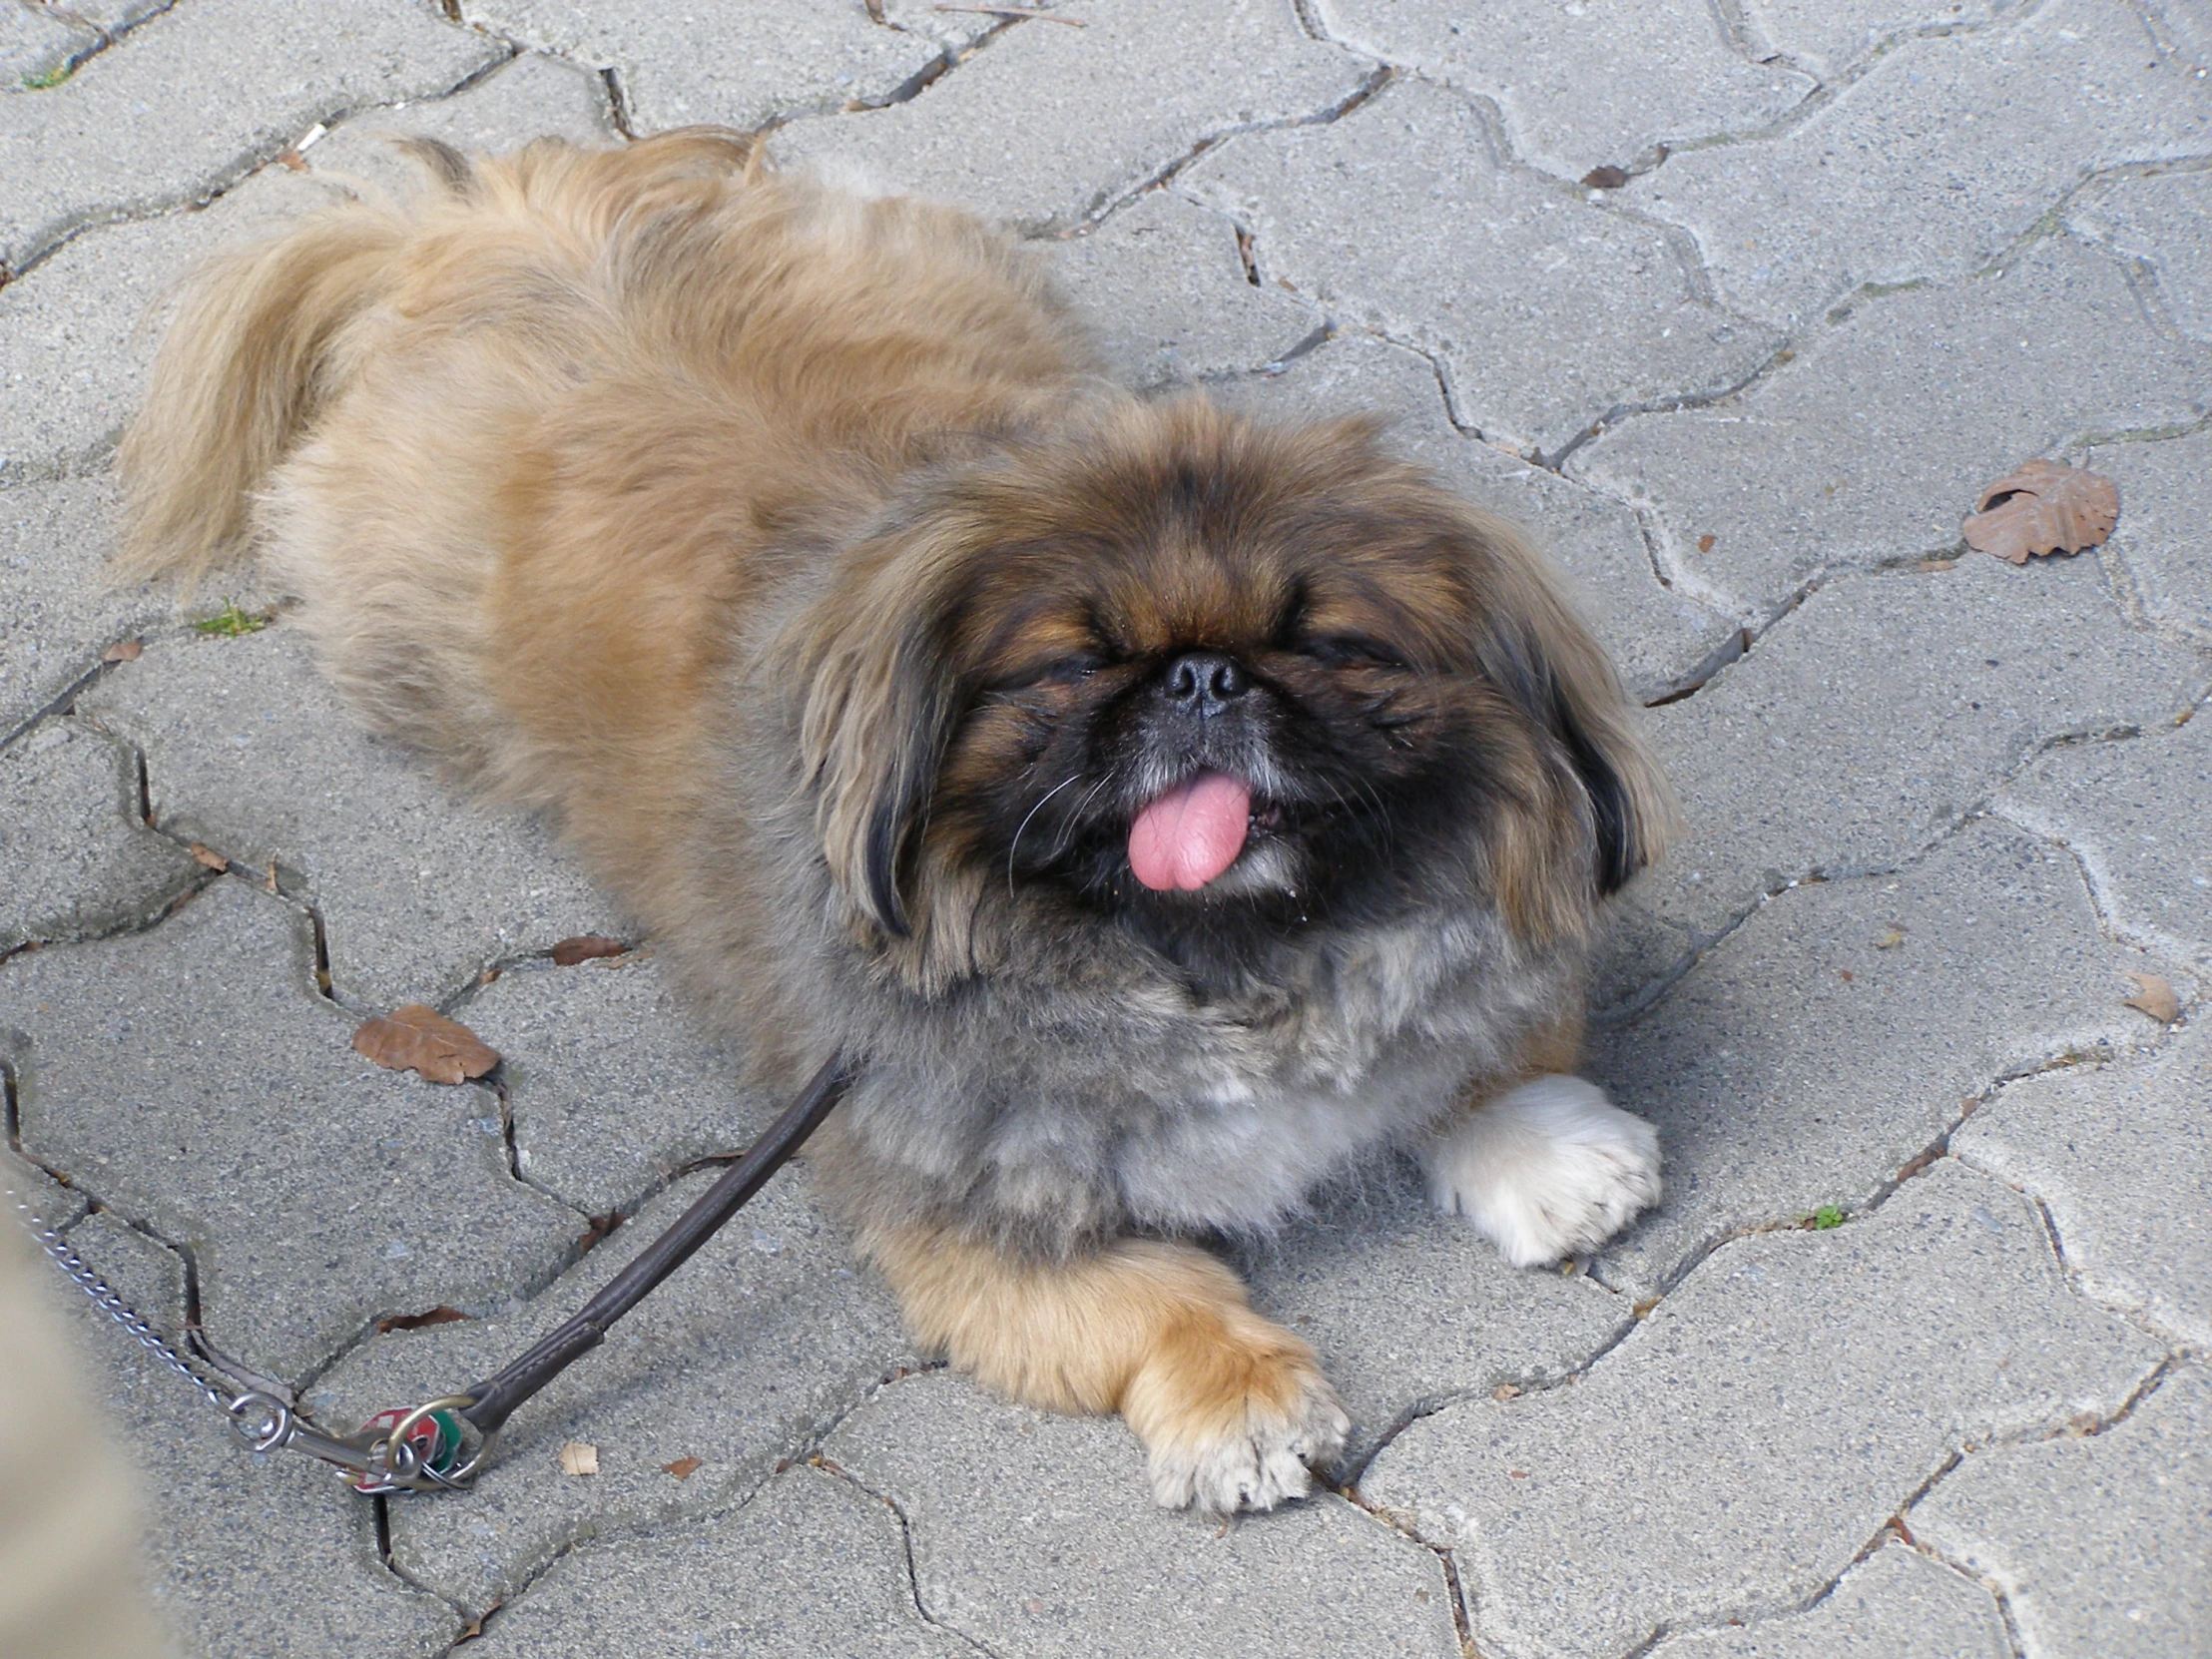 a small brown dog tied to a leash